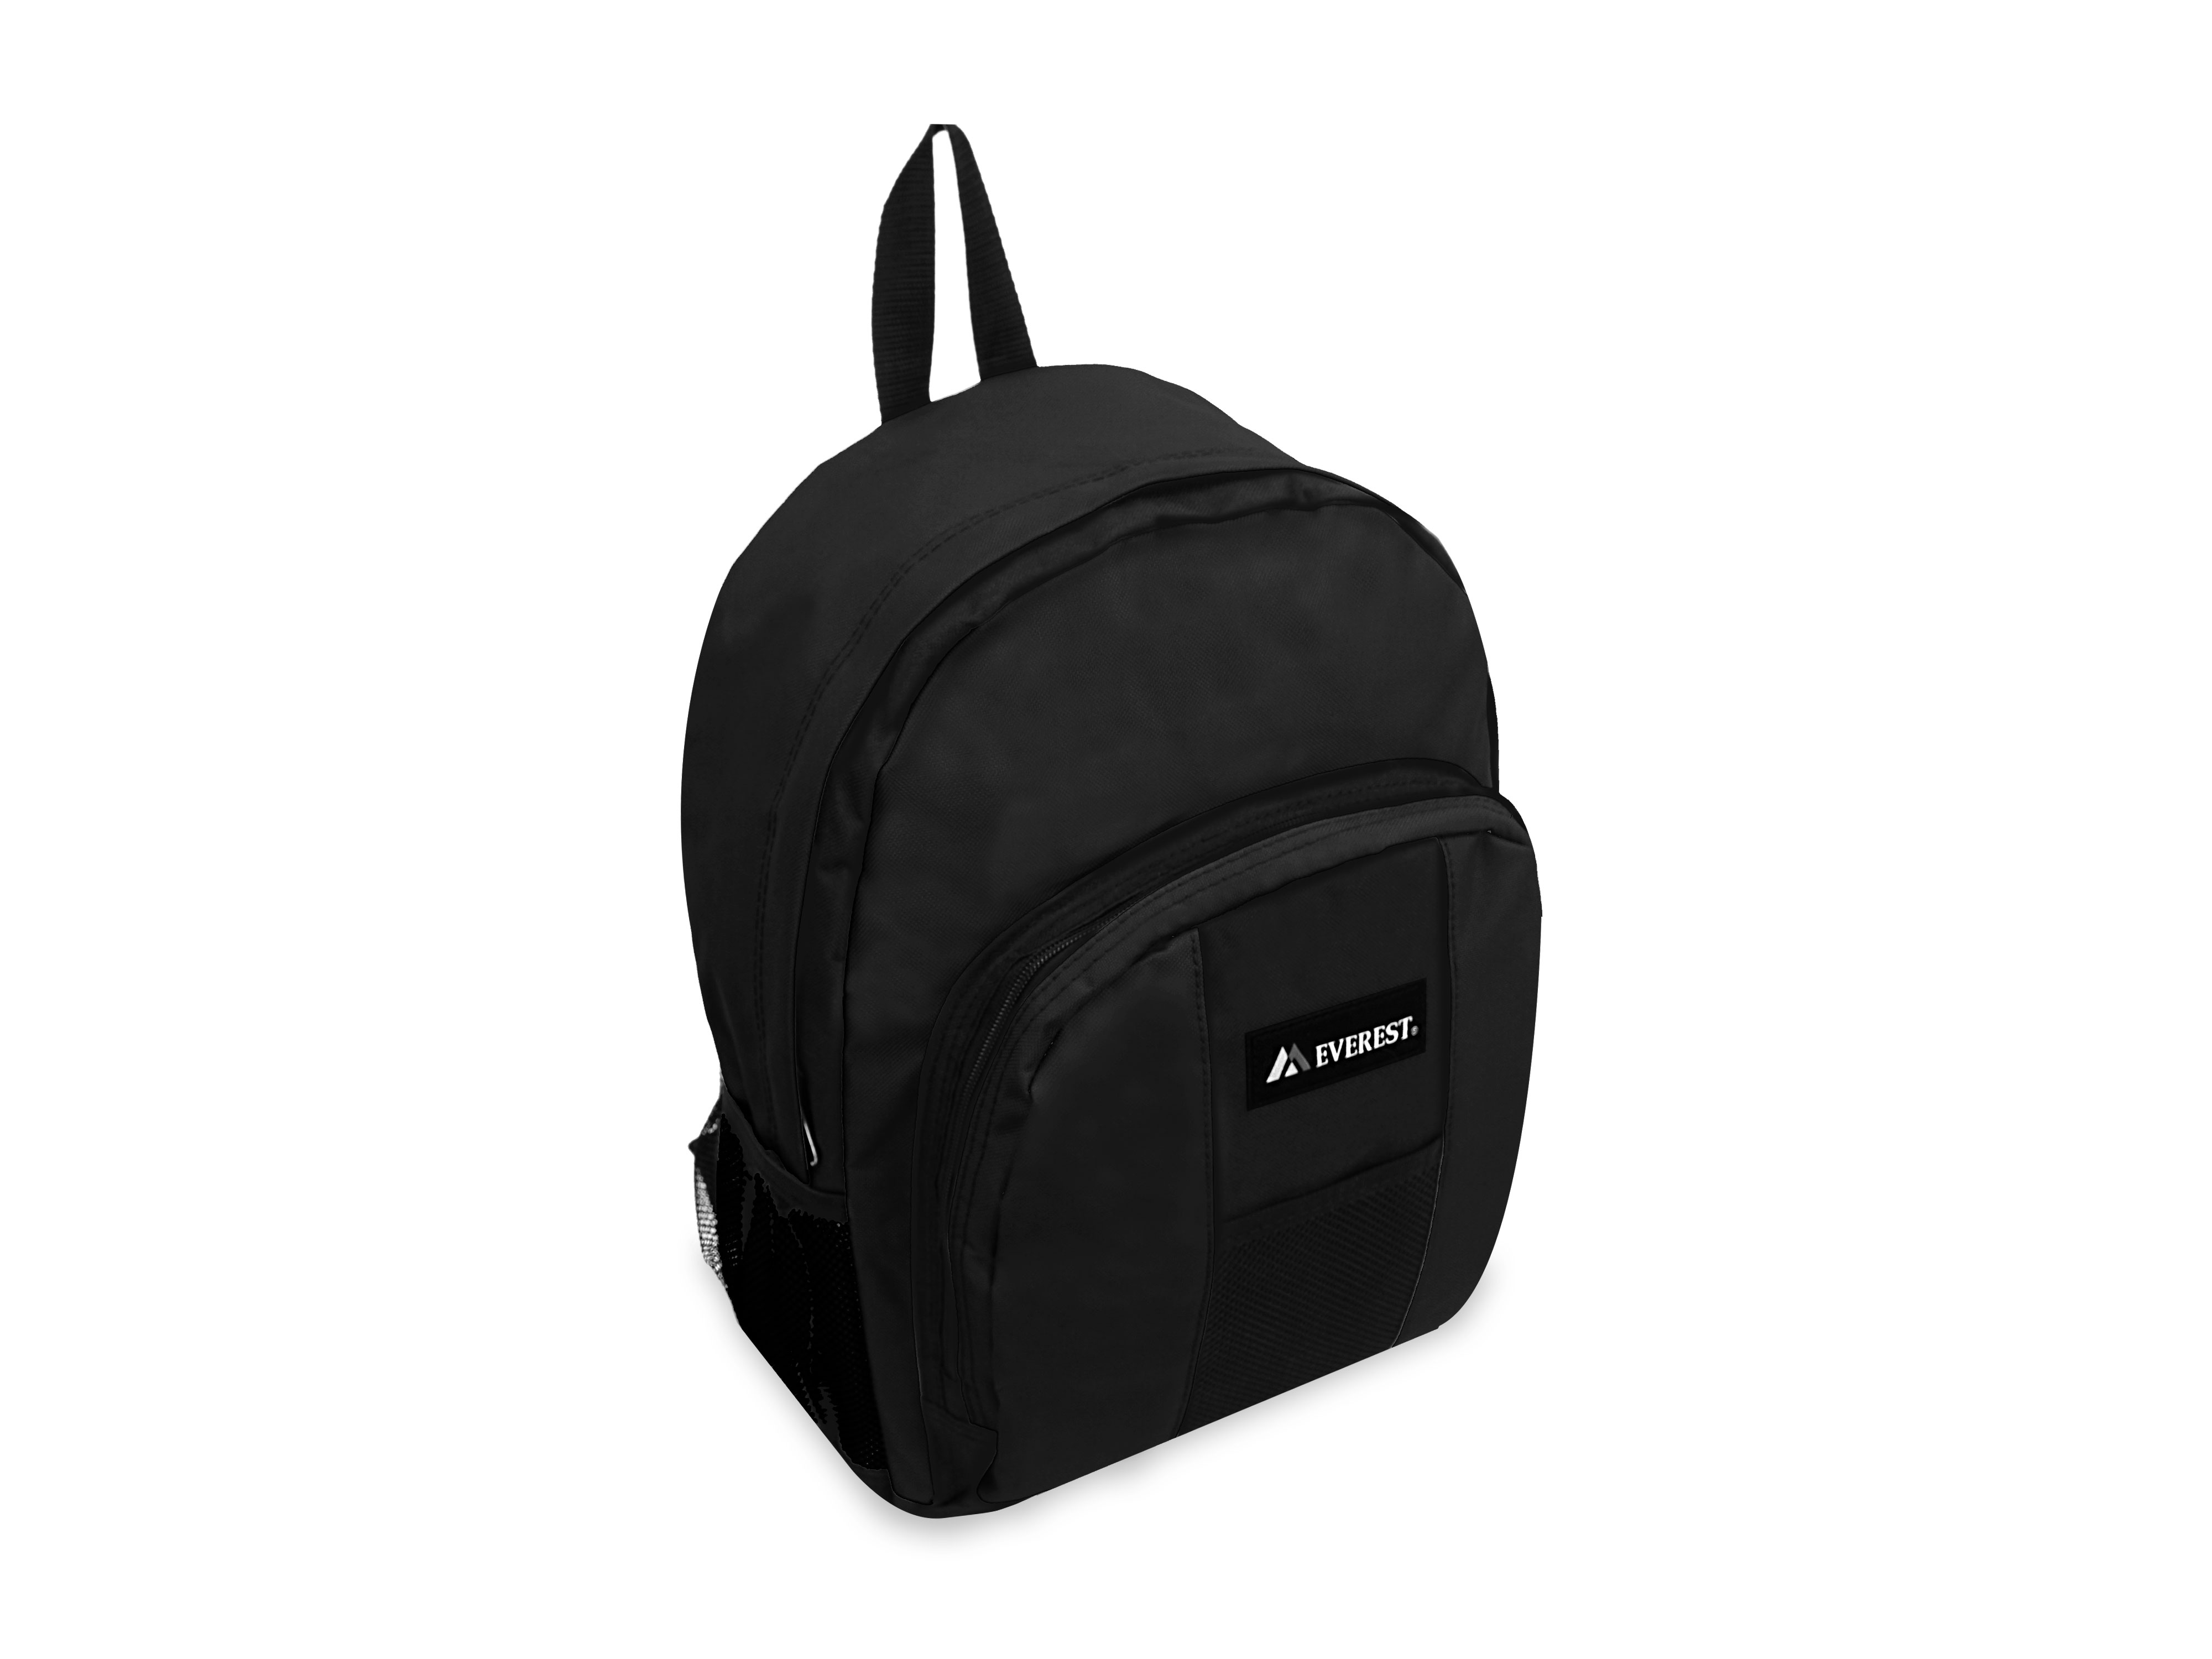 Everest Unisex Backpack with Front and Side Pockets, Black - image 1 of 4